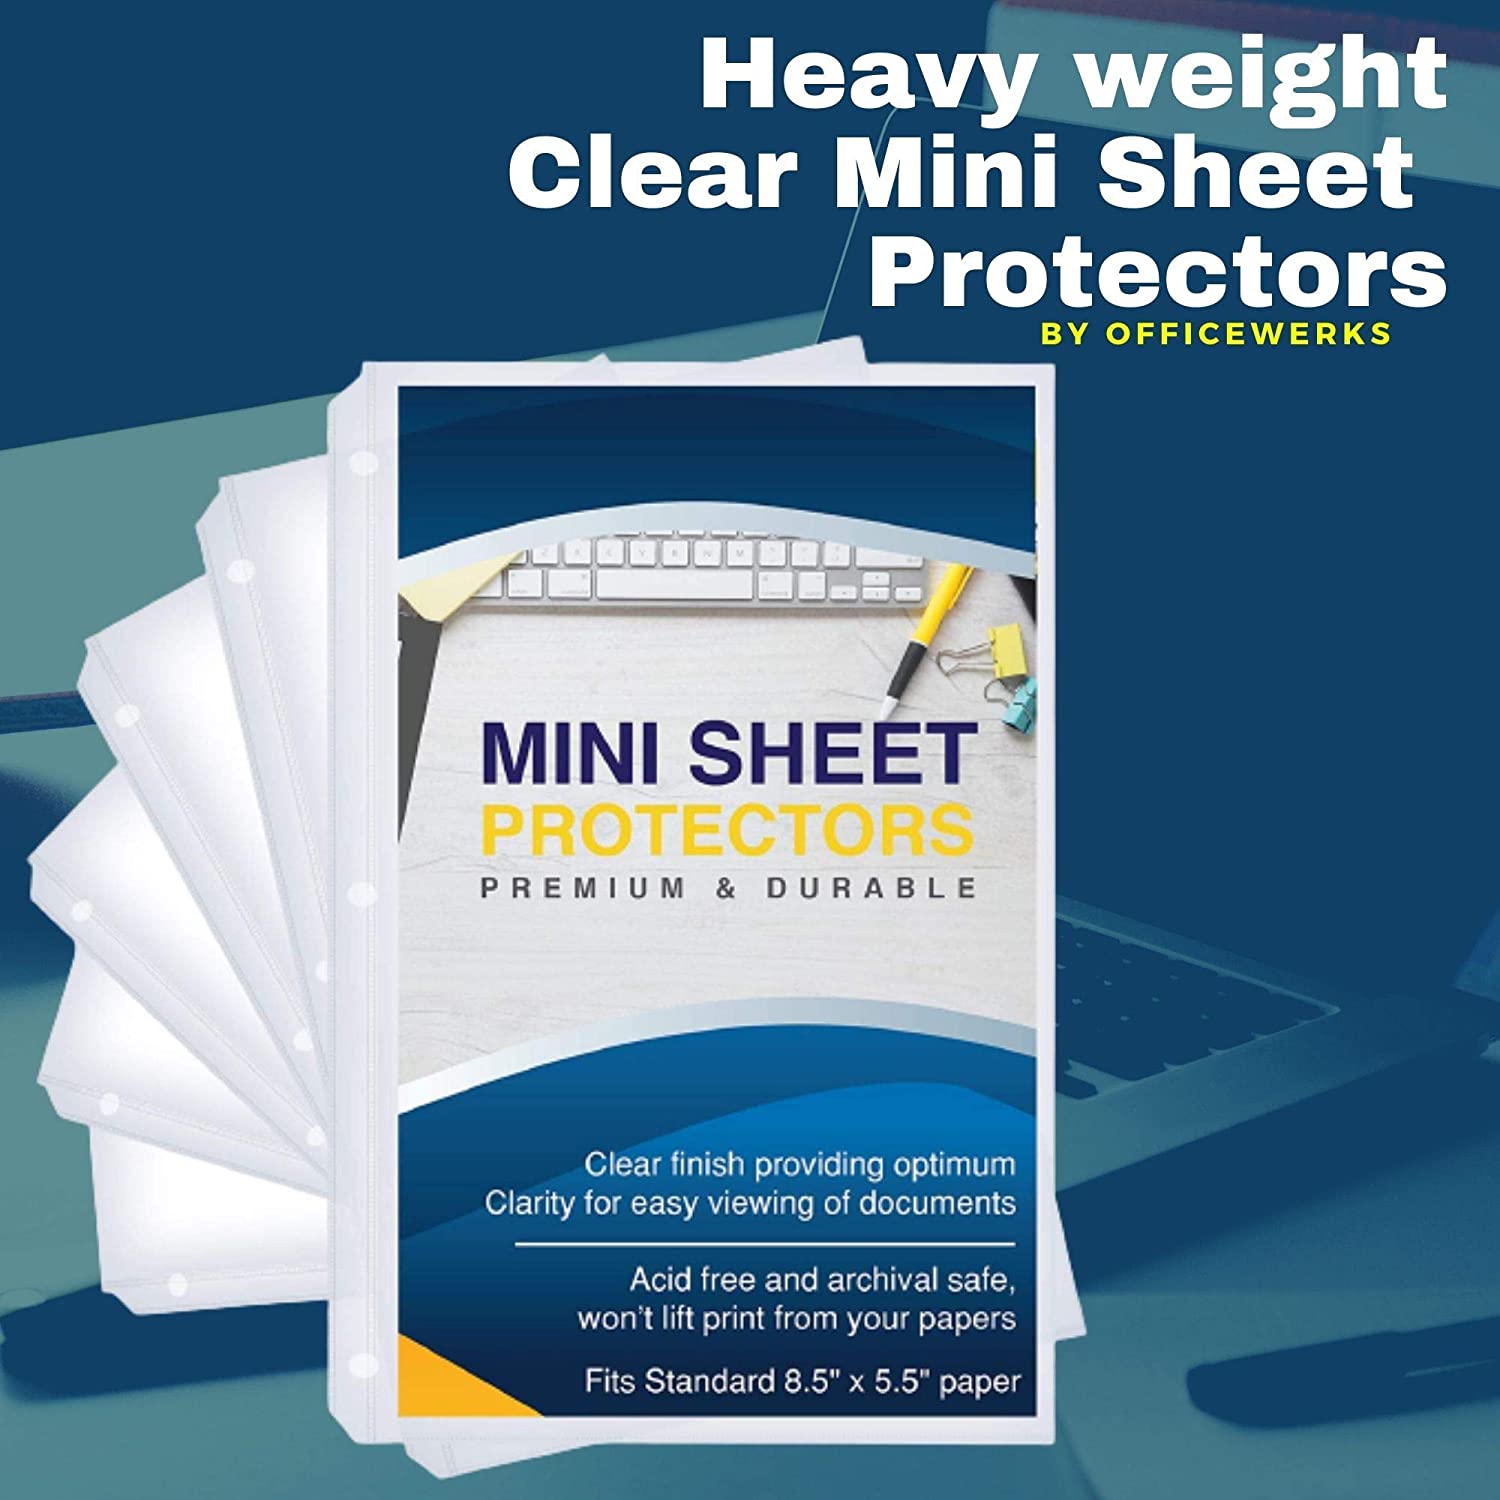 Heavyweight Clear Mini Sheet Protectors, 5.5" x 8.5", Top Load, Reinforced Holes, Acid-Free/Archival Safe - 200 Pack